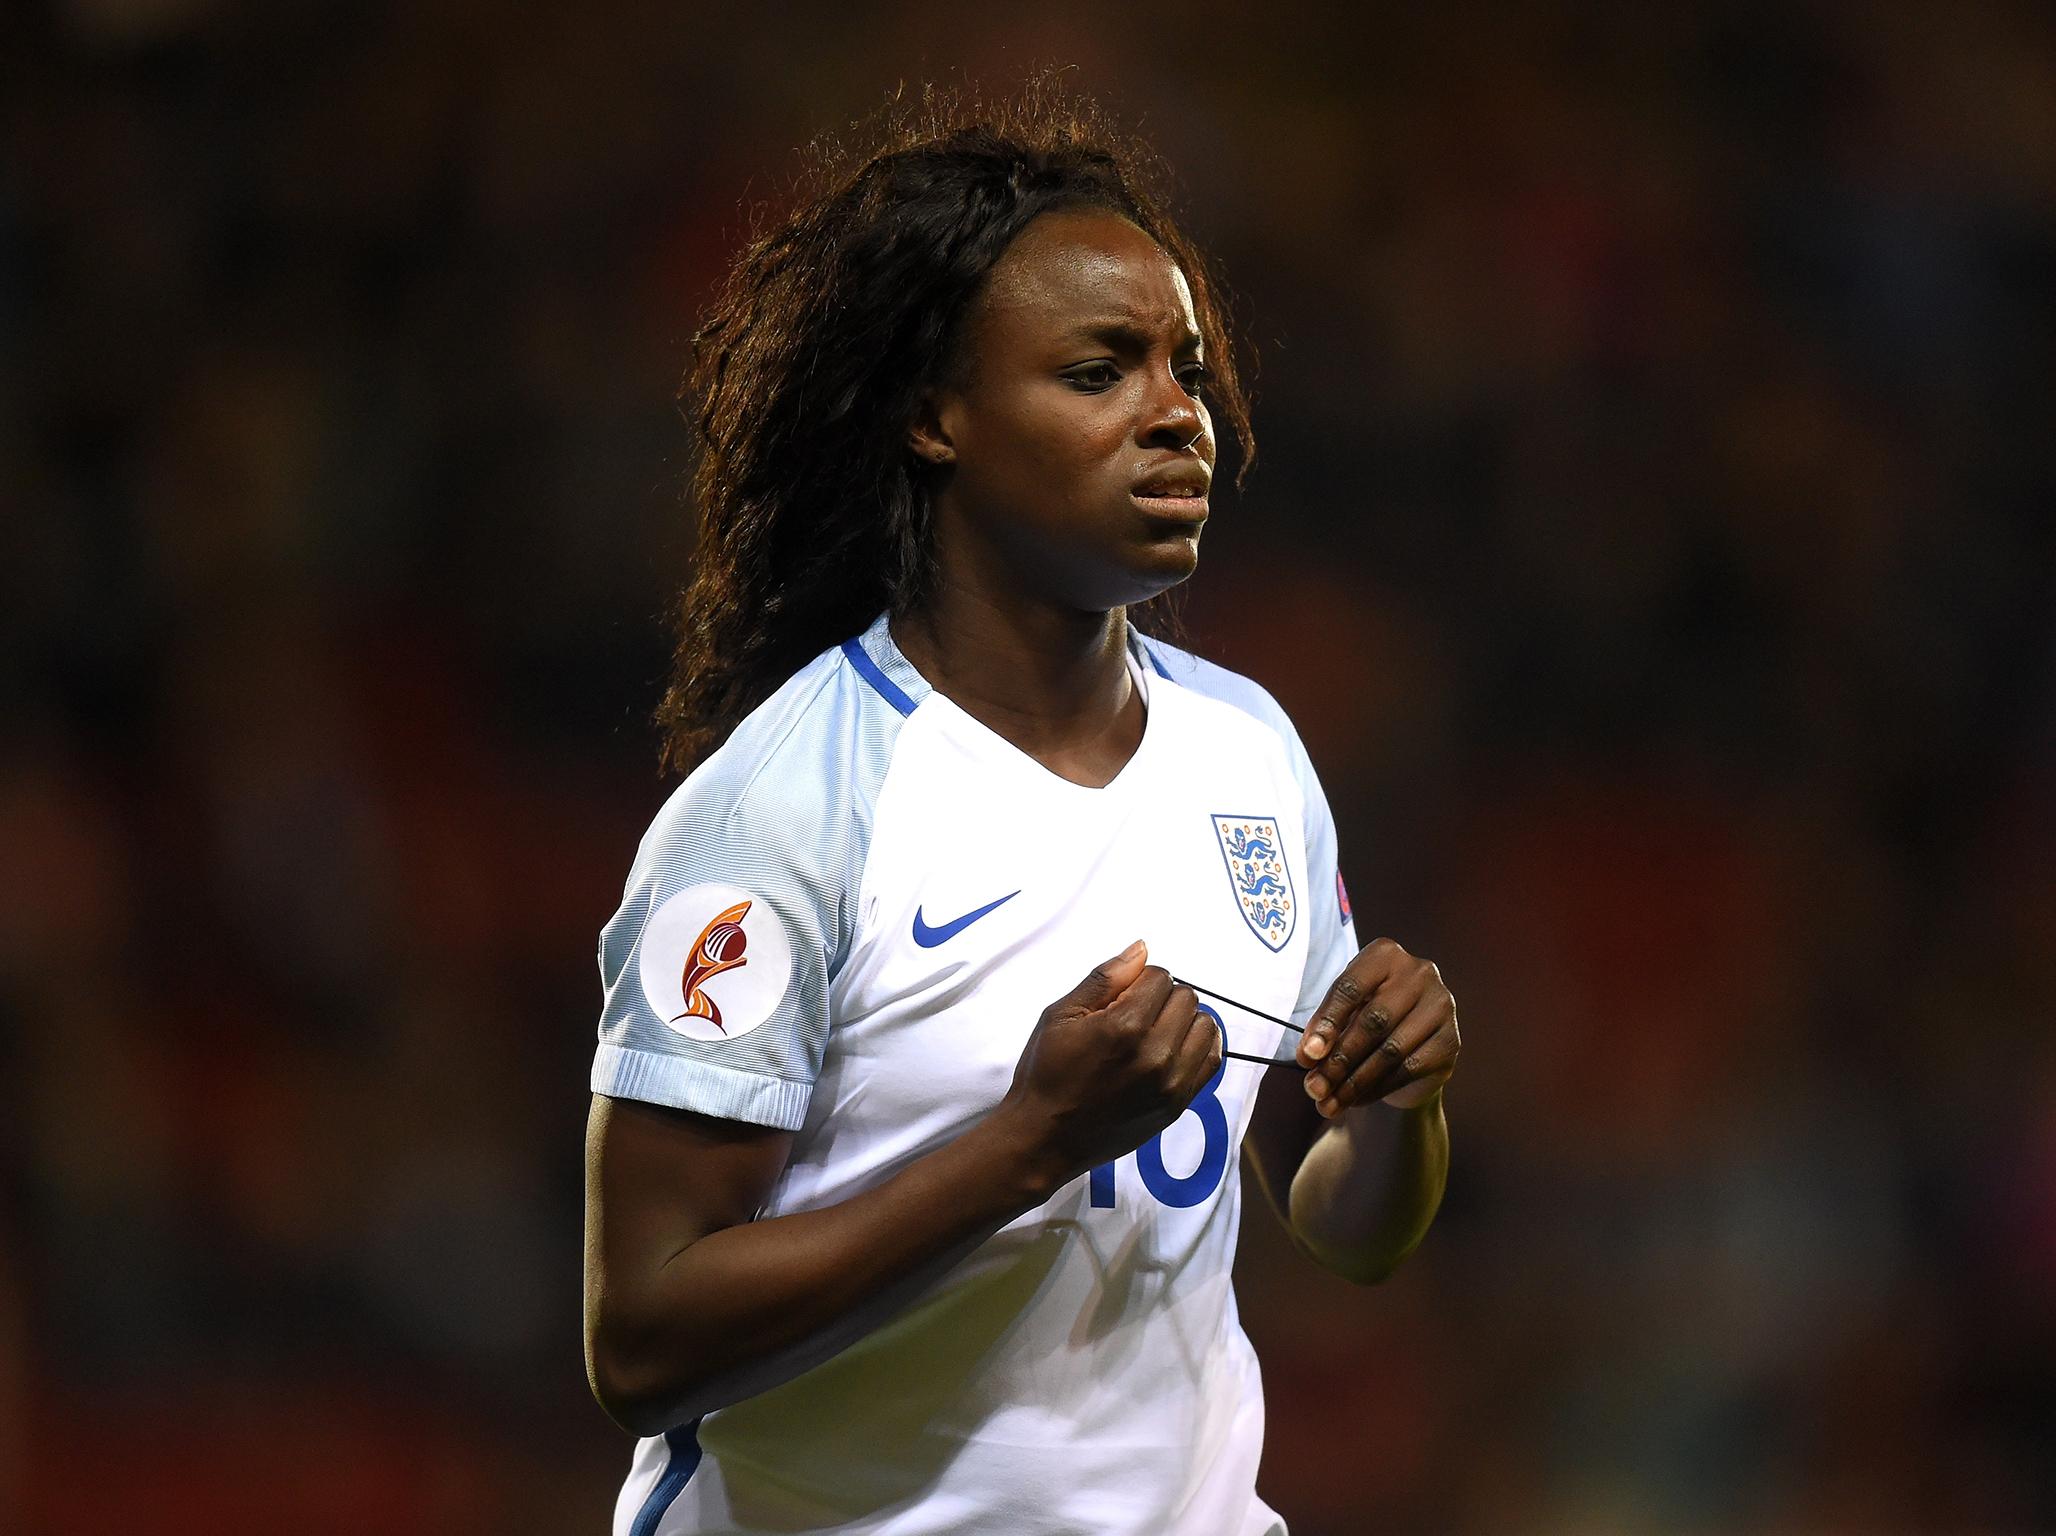 Eniola Aluko is welcome back to the England squad is she is selected, says Fara Williams